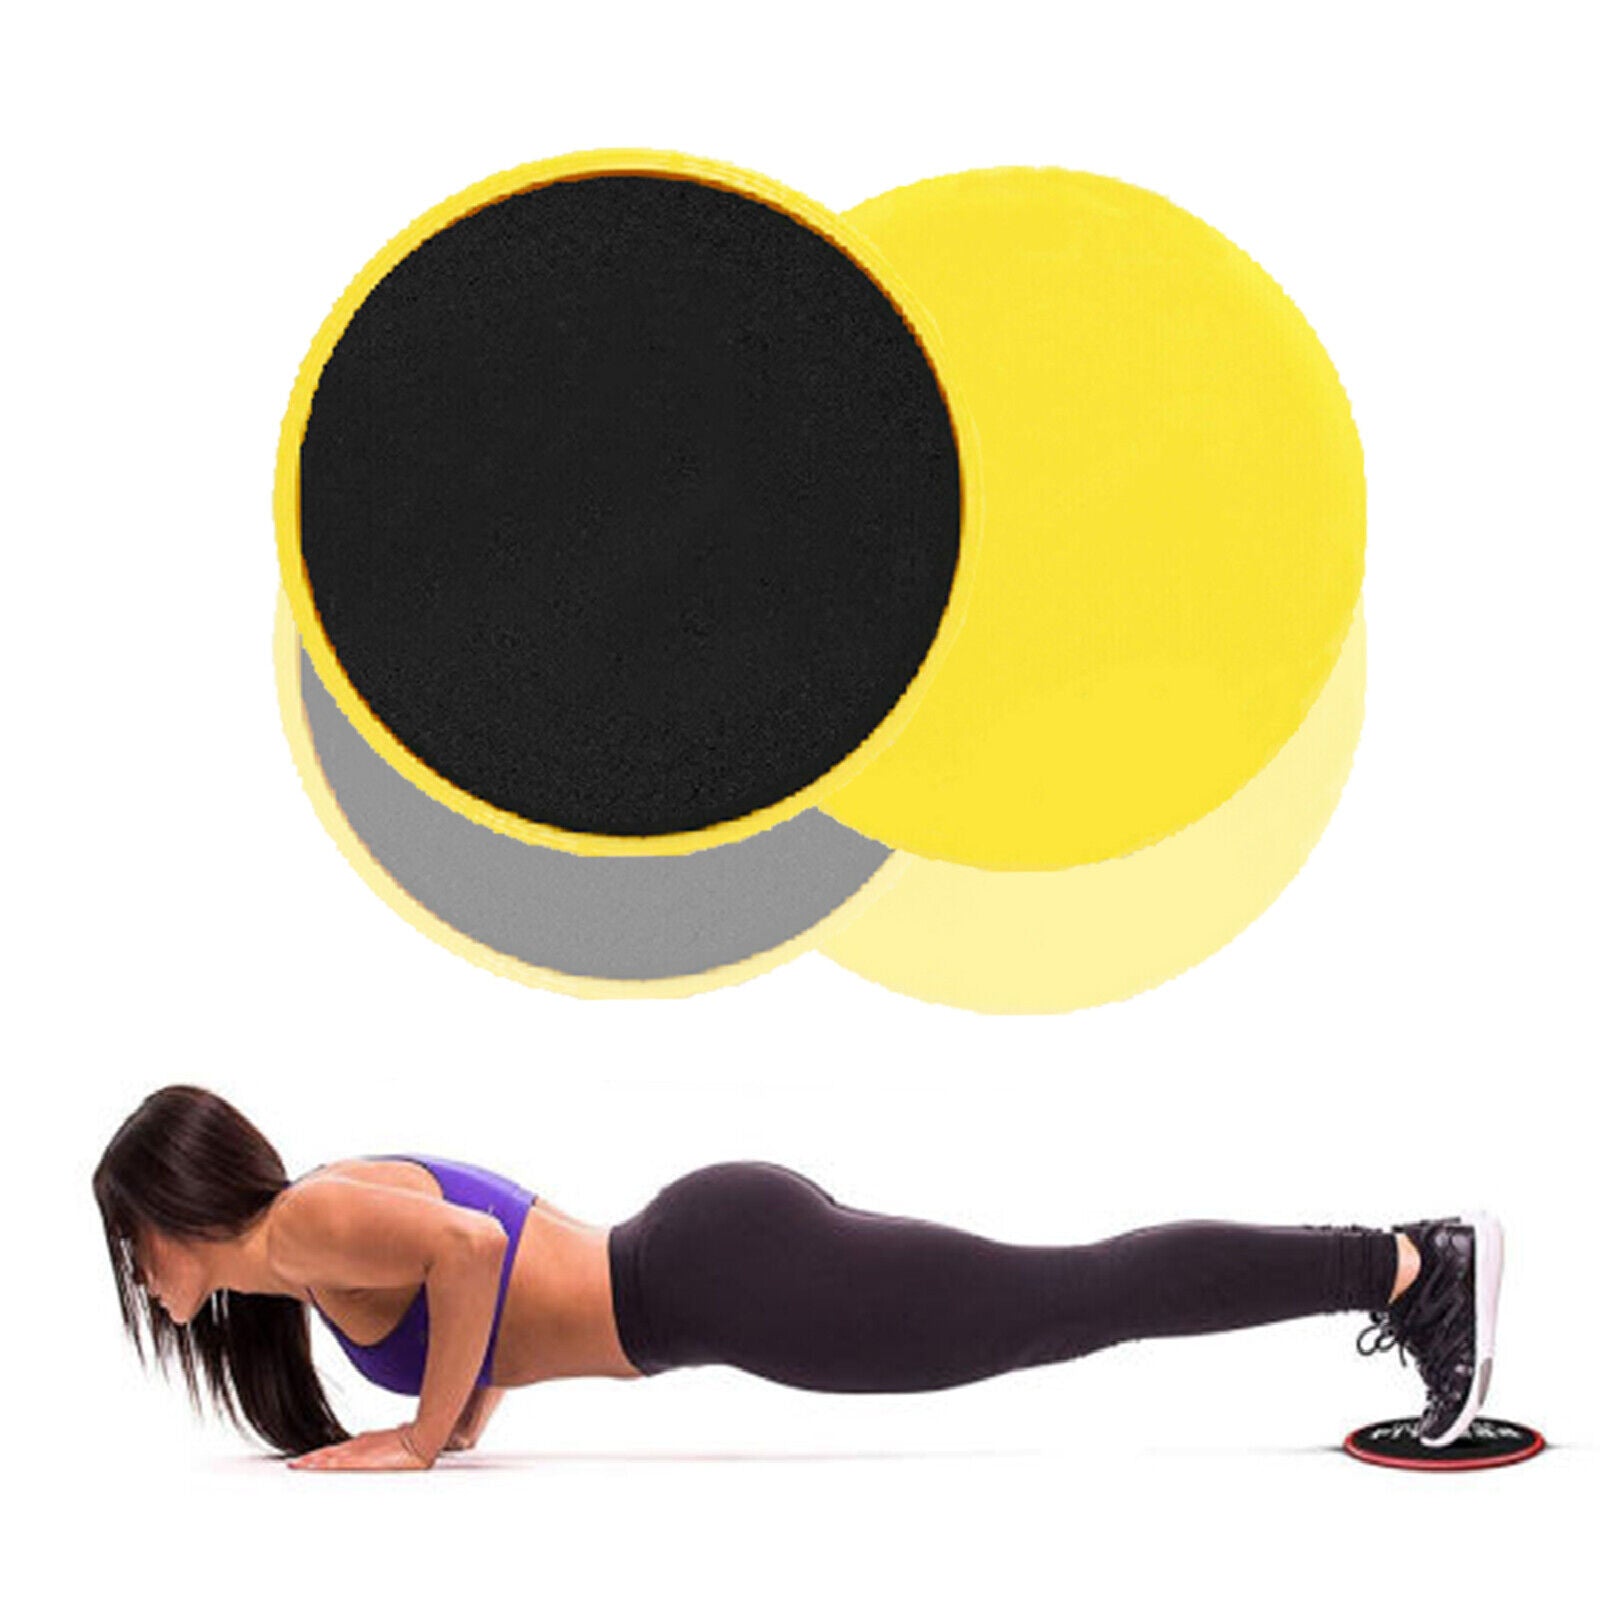 2x Gliding Discs Core Sliders Exercise Strength Stability Abdominal Glutes  Slide